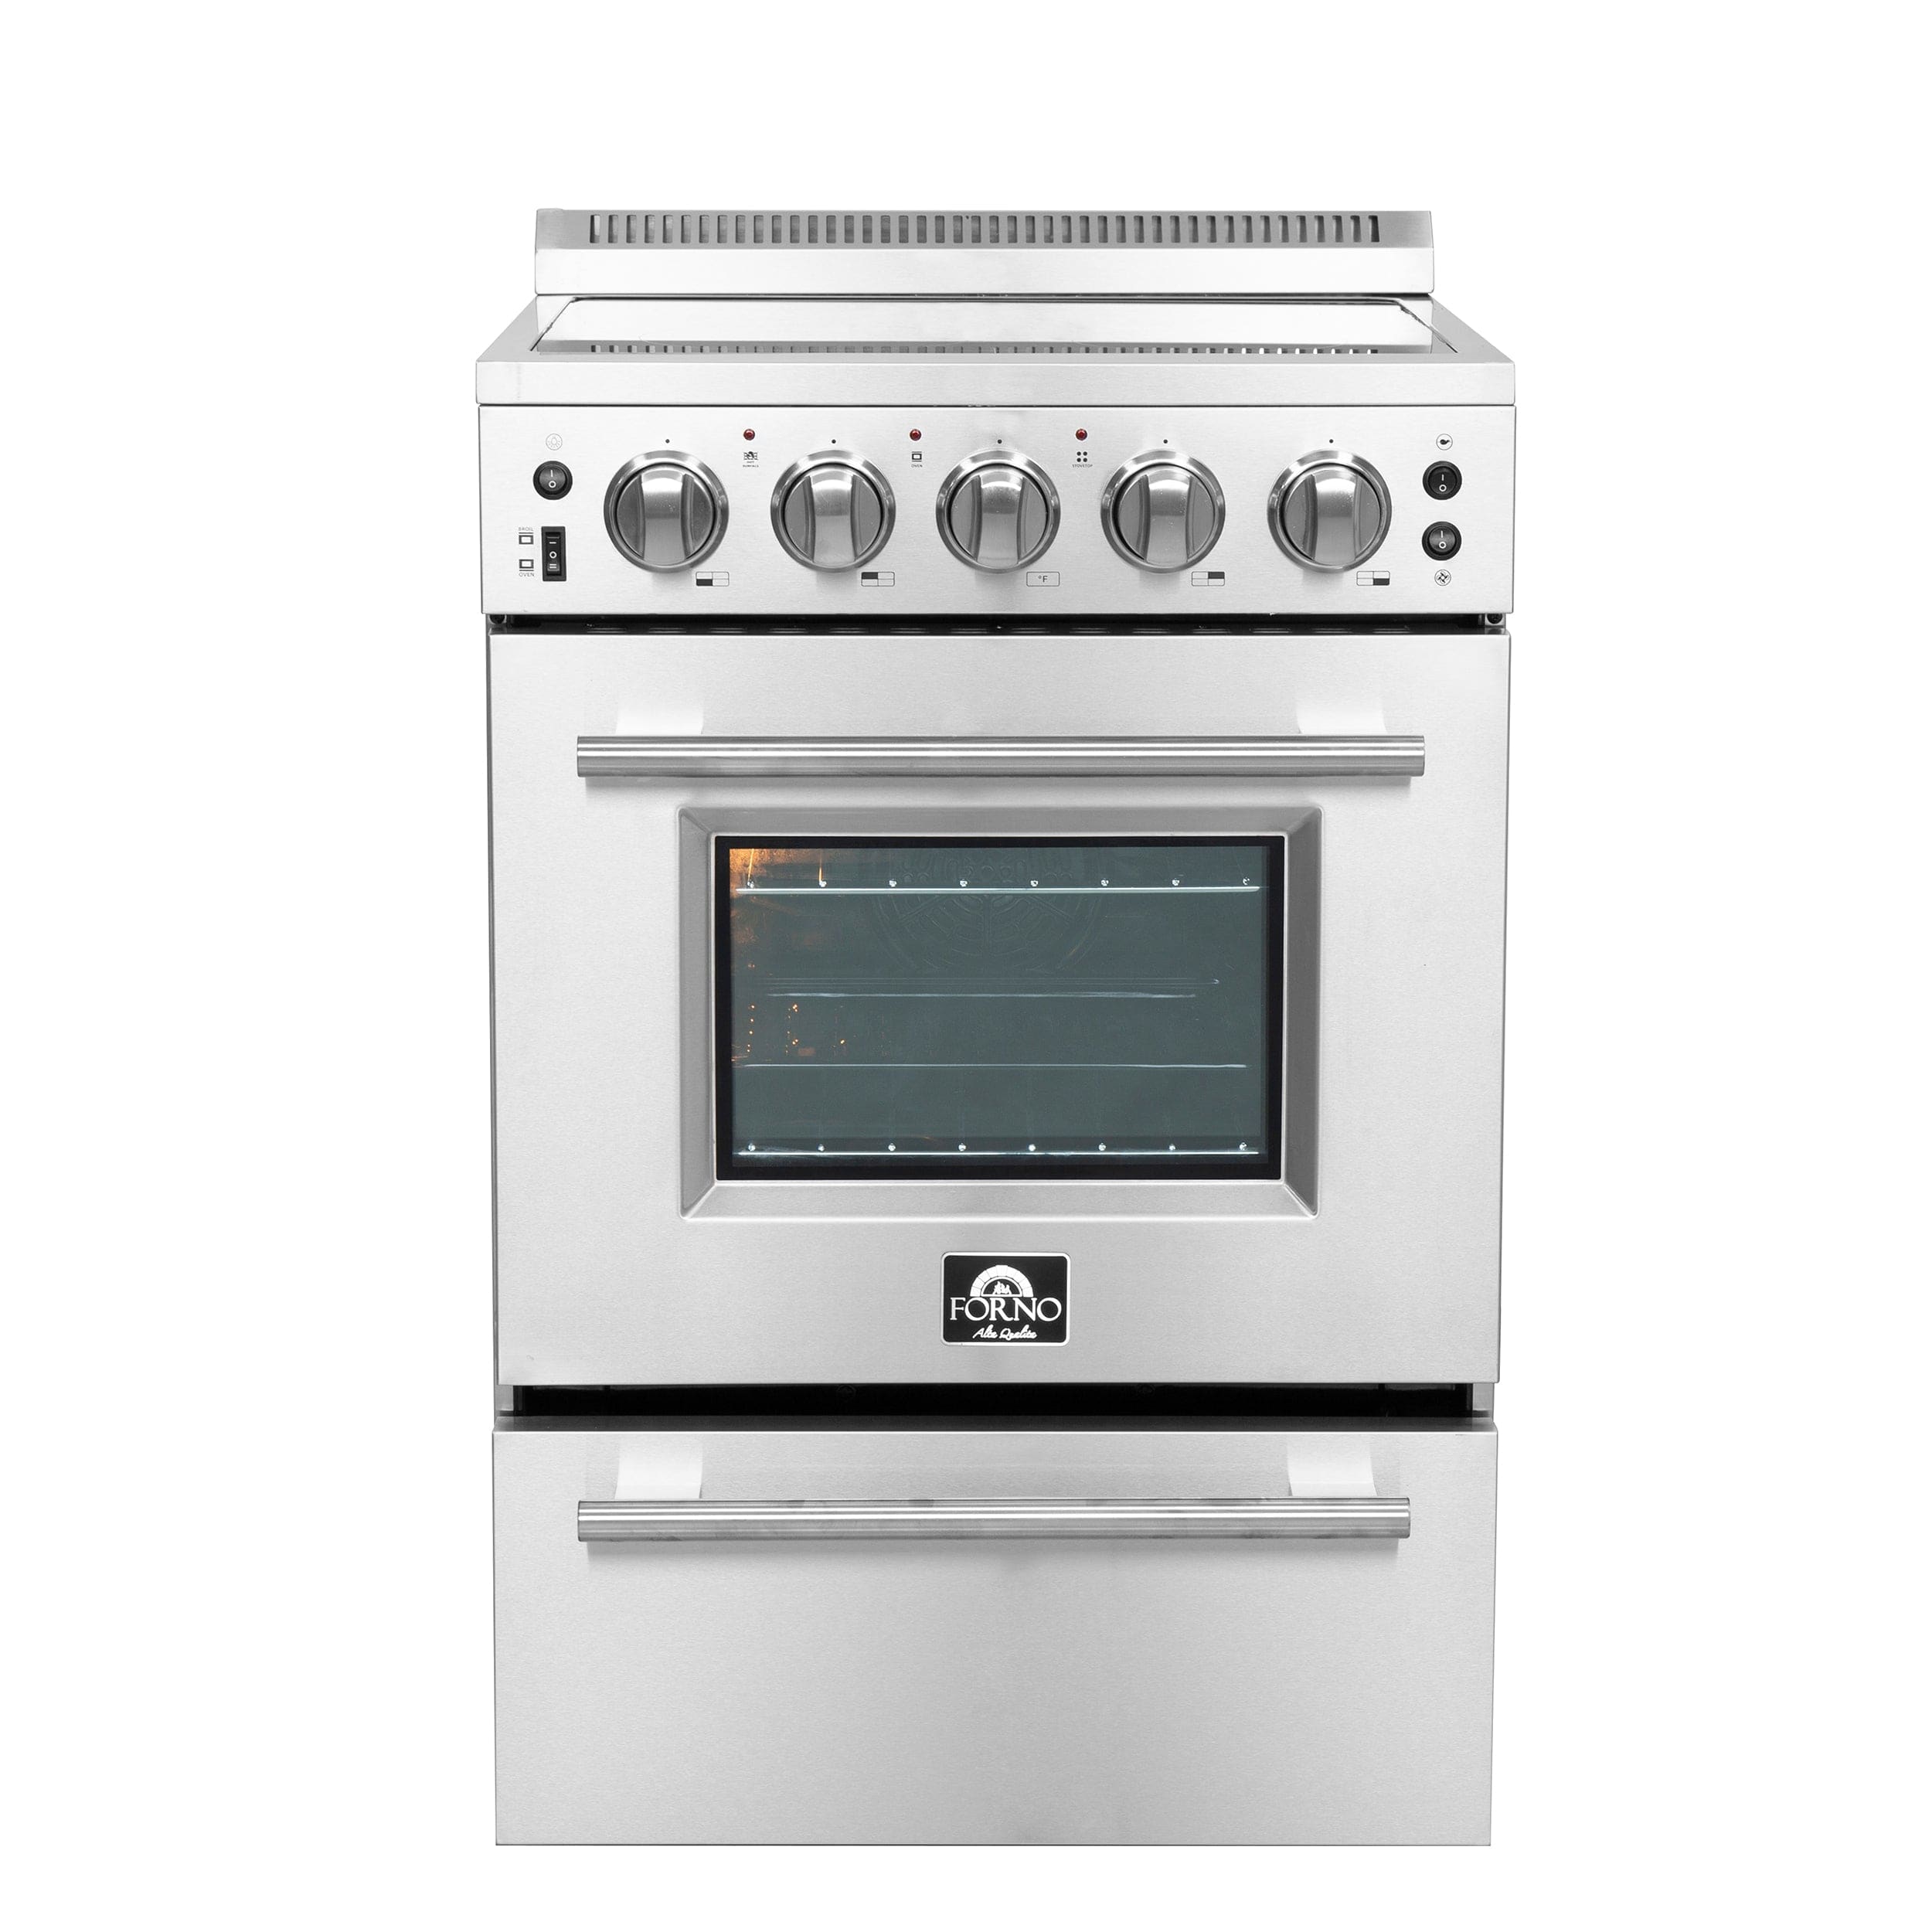 Forno Loiano 24" Freestanding Electric Range With 4 Element Burners in Stainless Steel, FFSEL6069-24 Ranges FFSEL6069-24 Luxury Appliances Direct